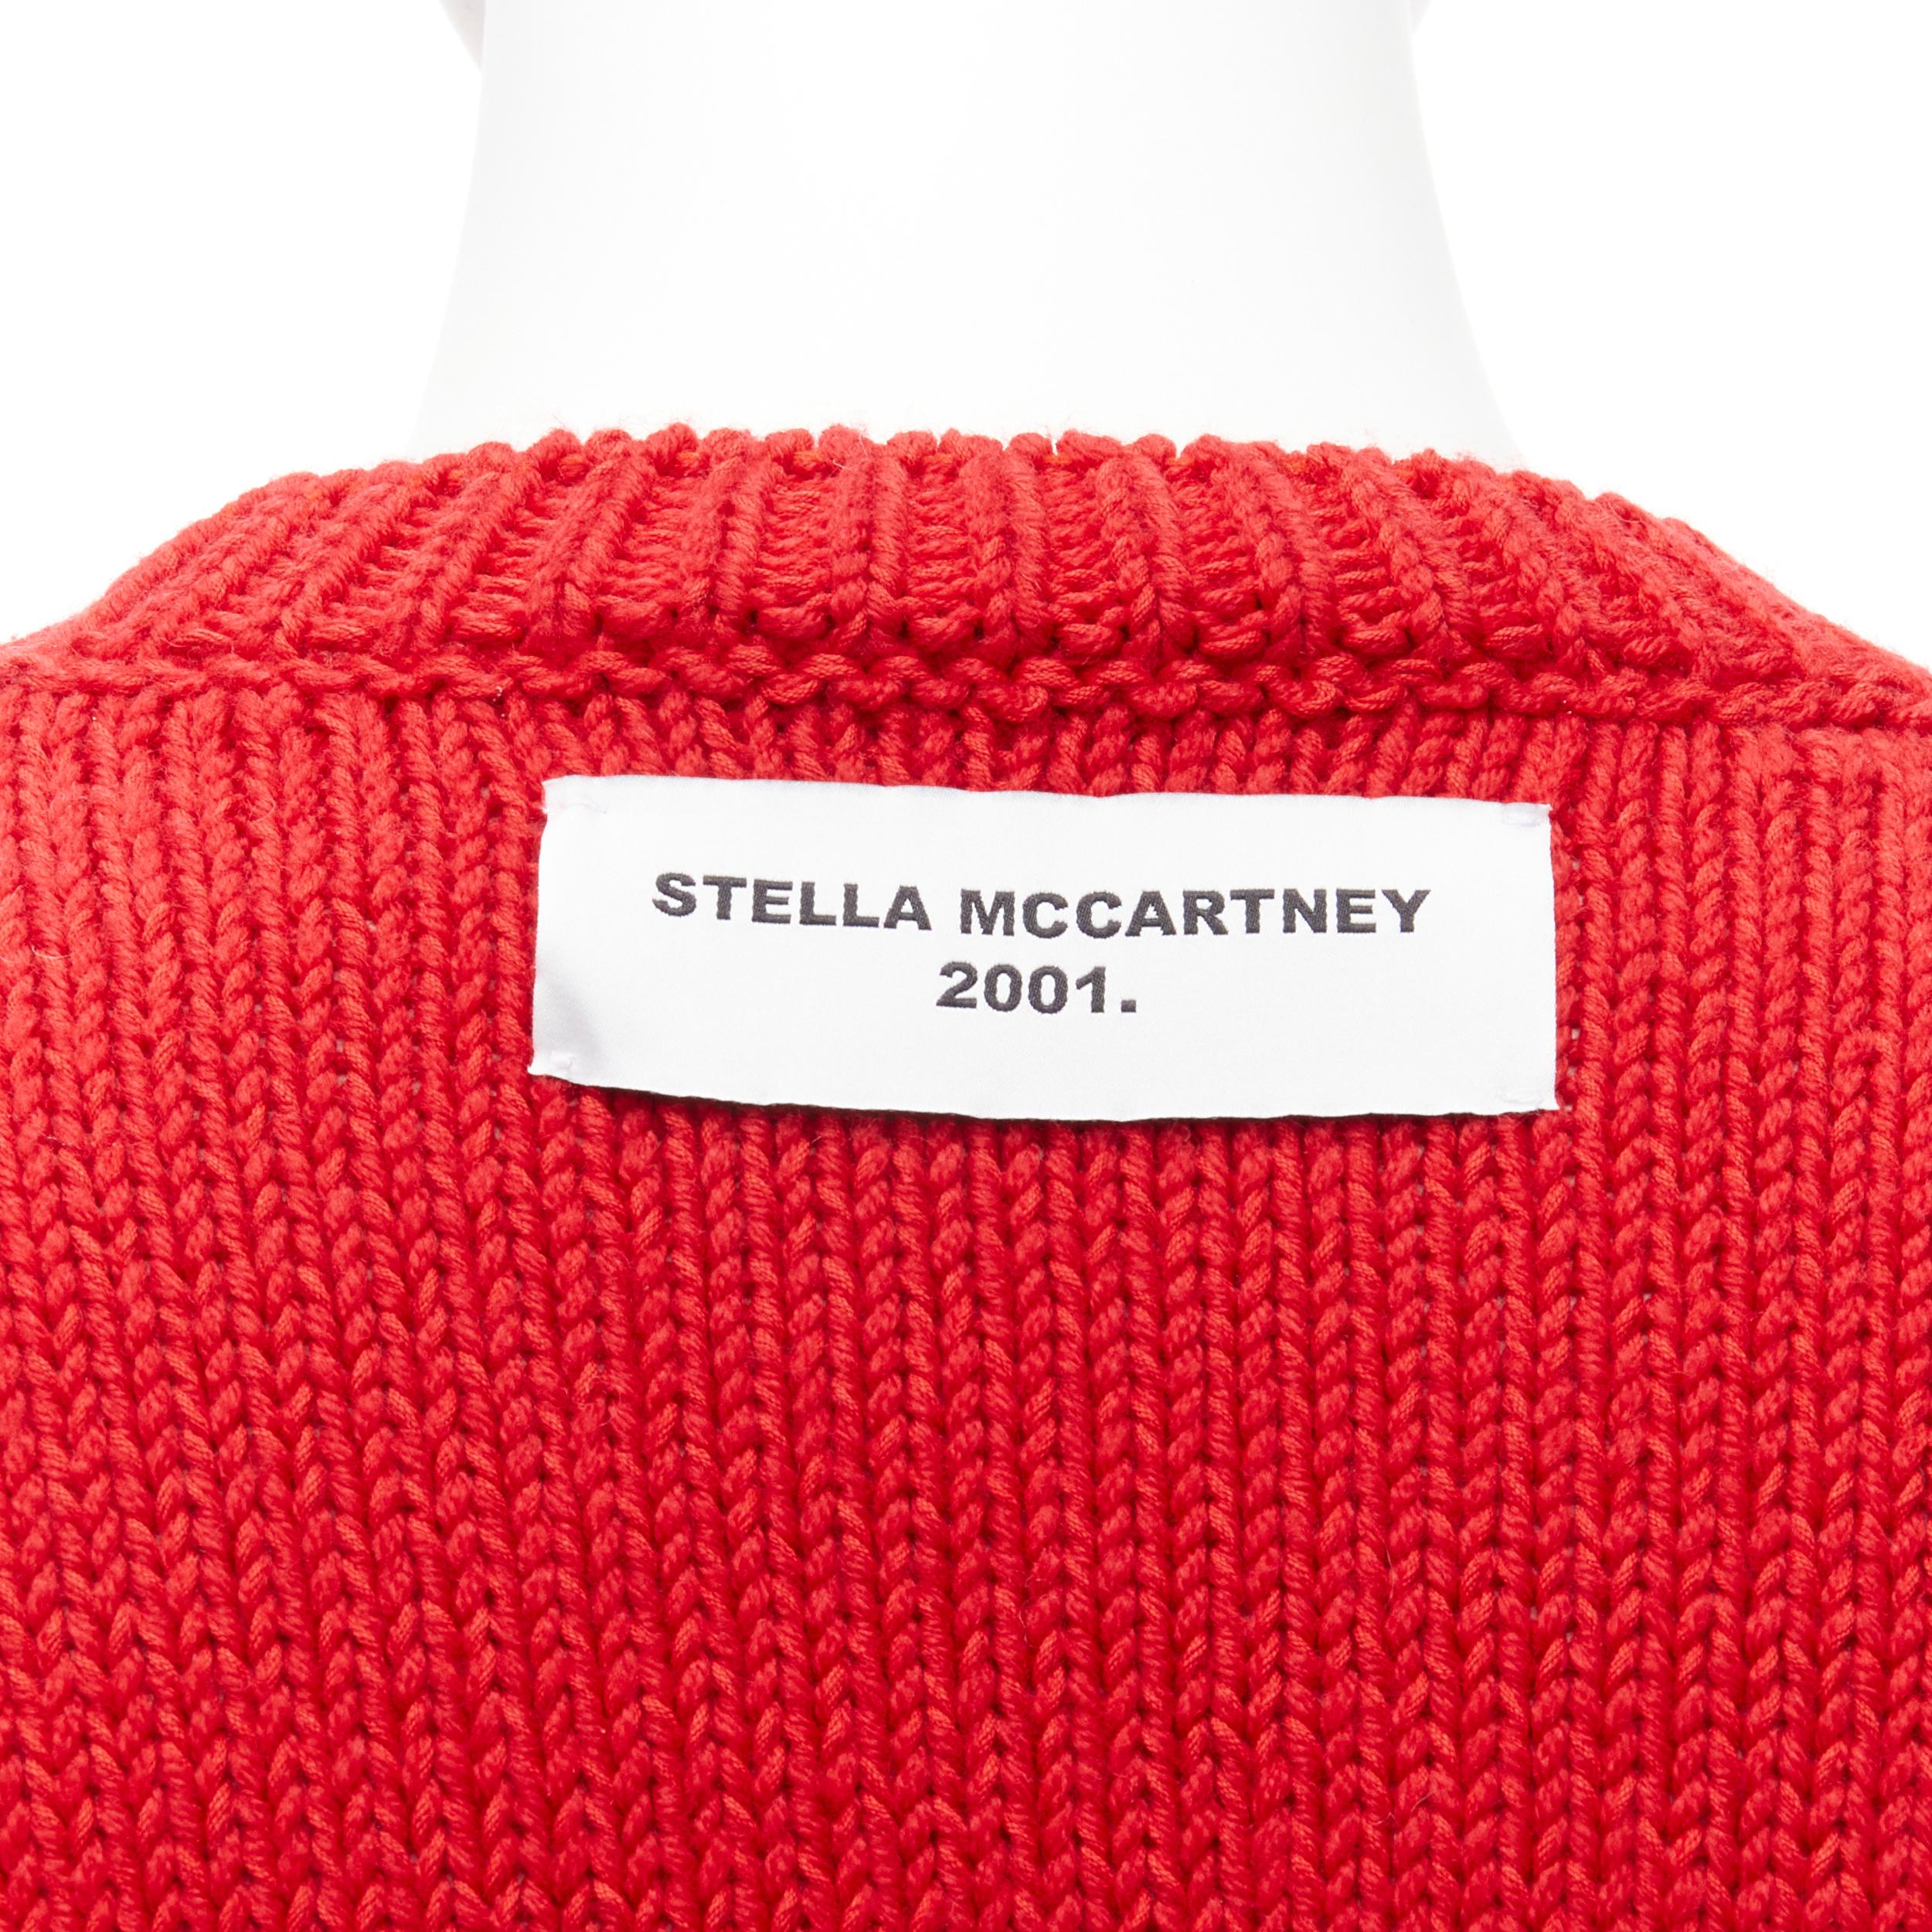 STELLA MCCARTNEY red wool cotton textured bunny sweater IT34 XXS
Reference: AAWC/A00478
Brand: Stella McCartney
Designer: Stella McCartney
Collection: Lunar New Year limited collection
Material: Wool, Cotton, Blend
Color: Red, White
Pattern: